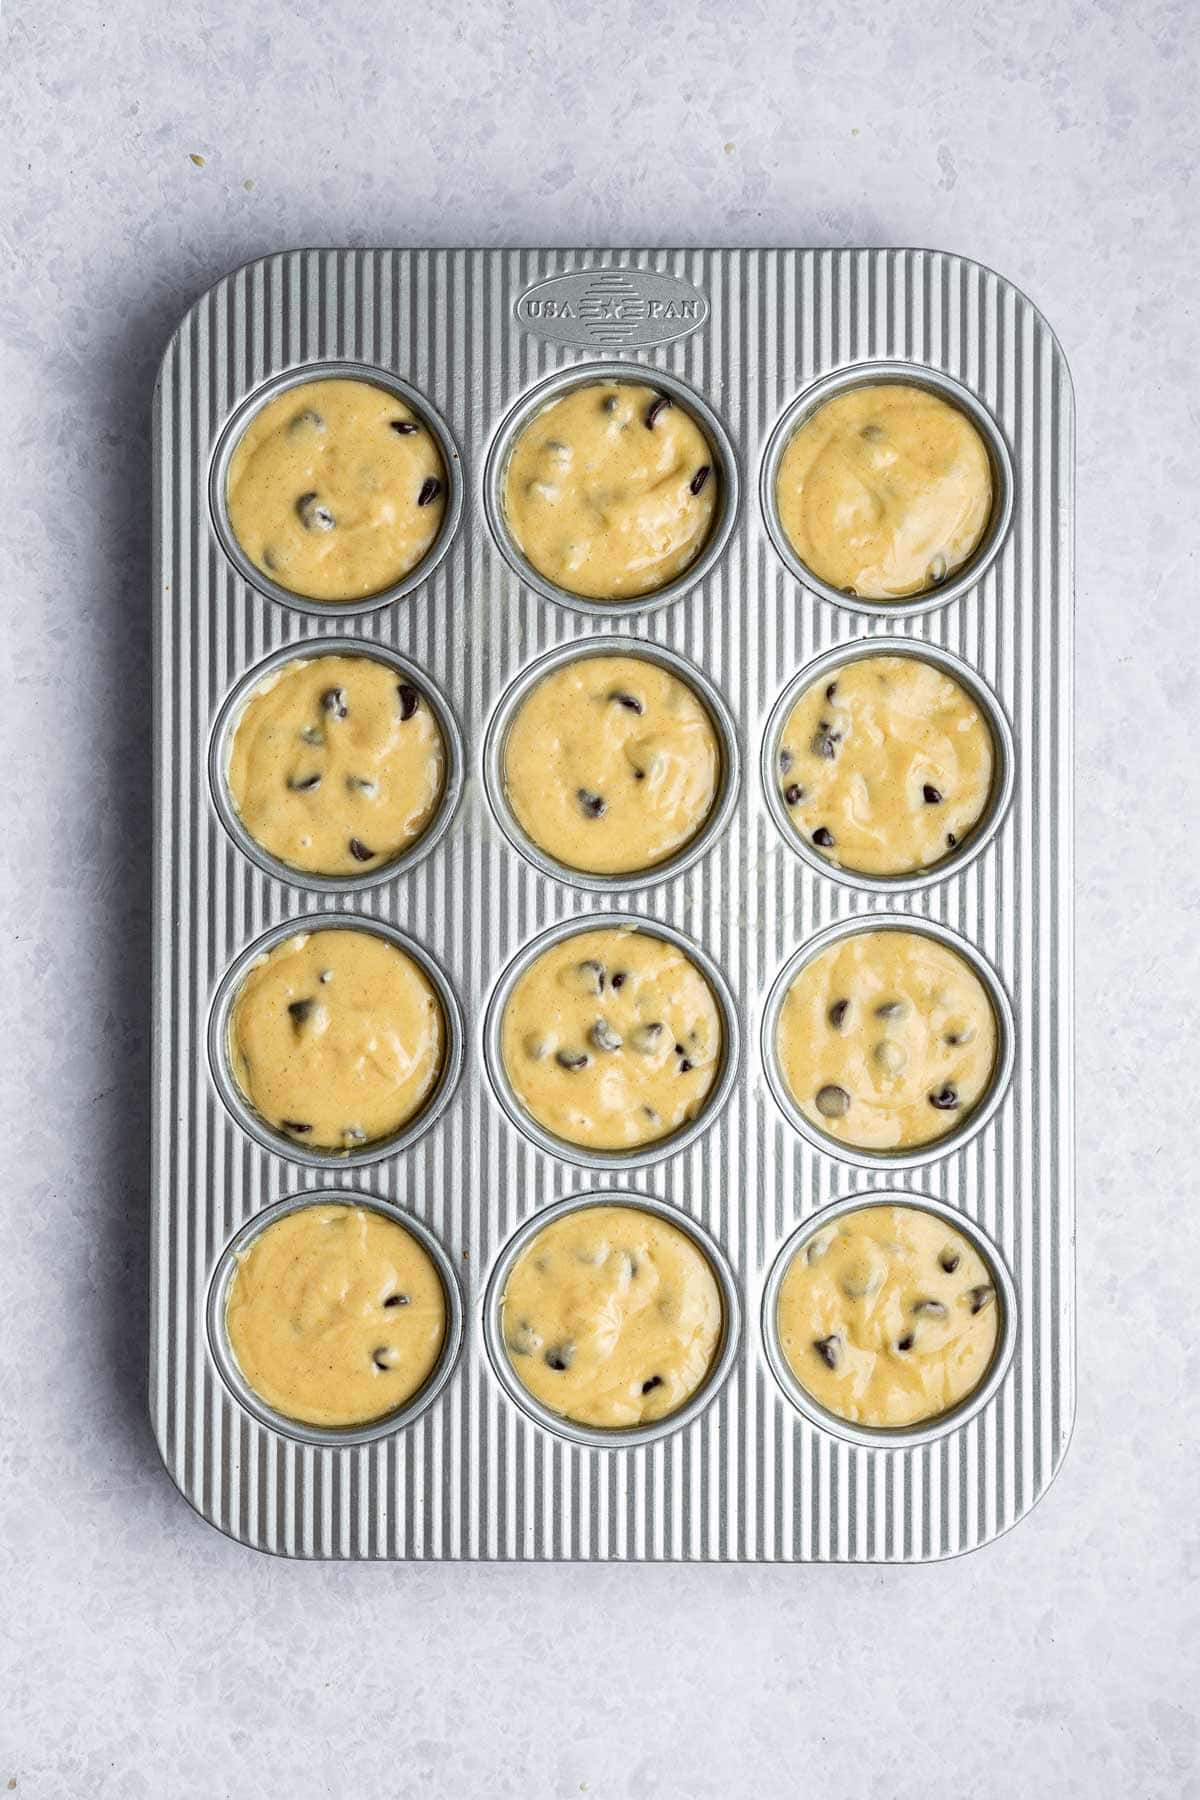 unbaked muffin batter filled to the top of a muffin tin.